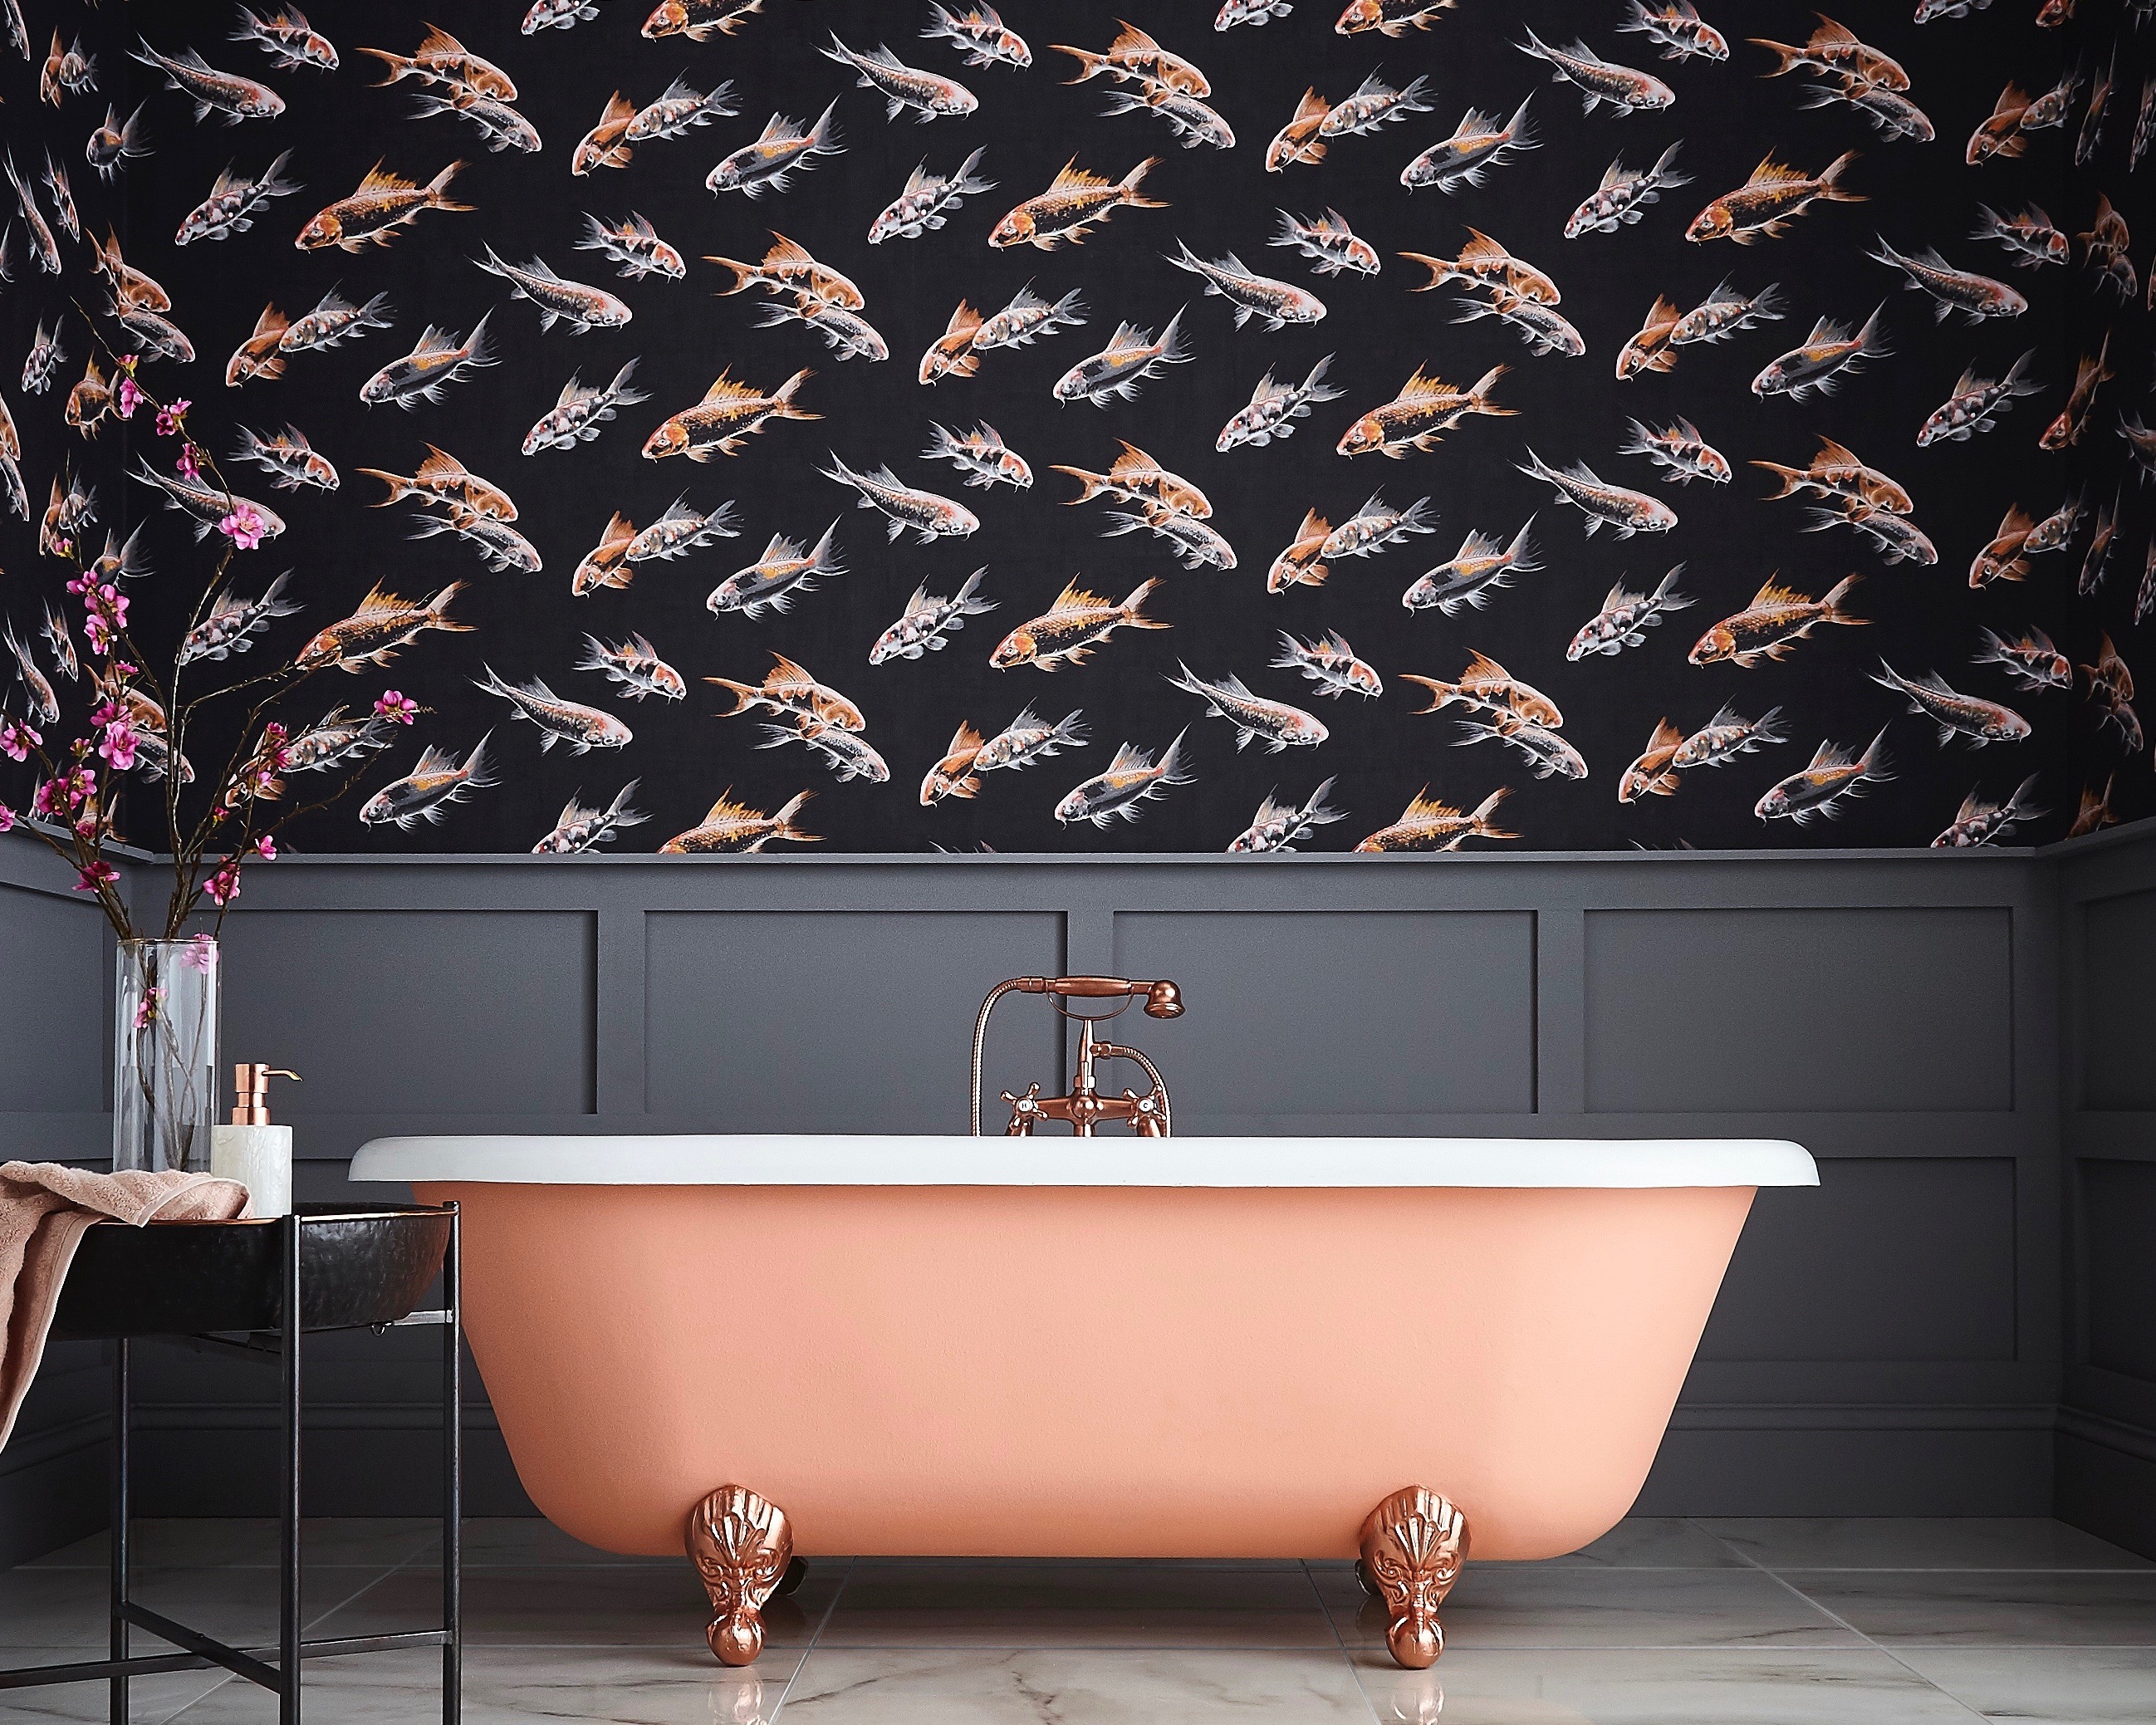 Bathroom wallpaper: yes, it can work with moisture - The Interiors Addict